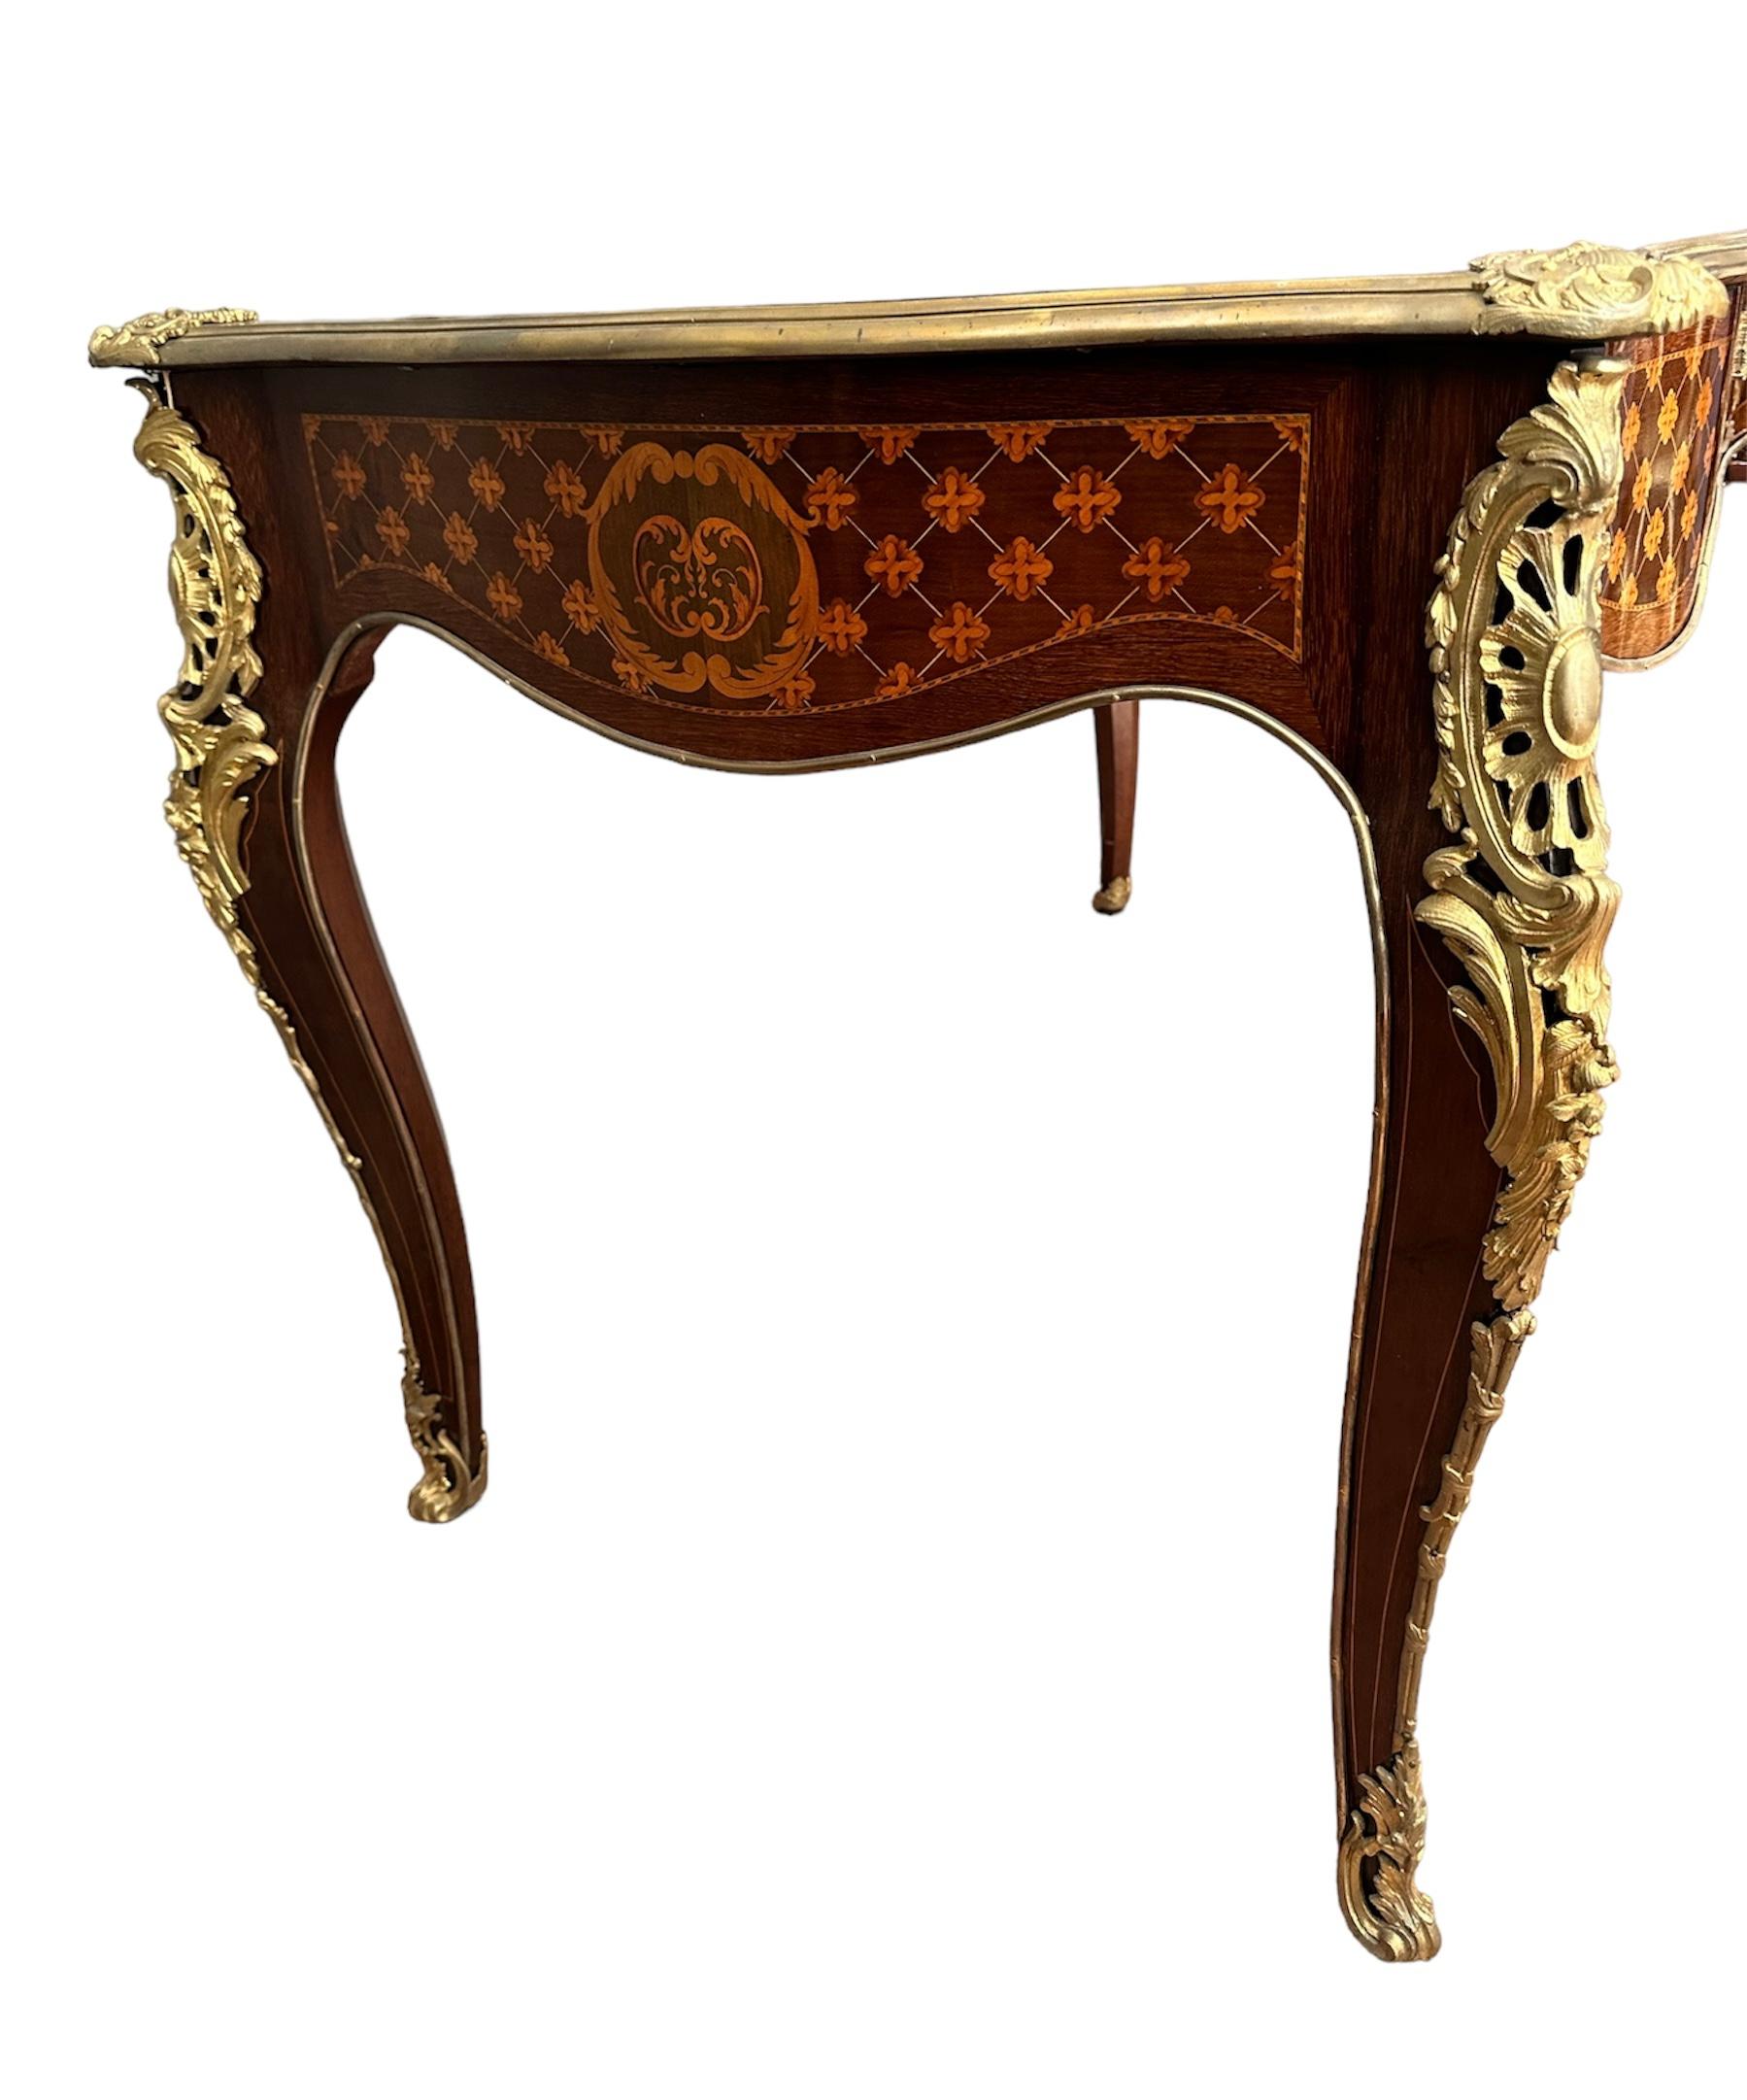 Louis XV 19th Century Inlaid Desk Mounted with Gilded Bronzes, by Paul Sormani